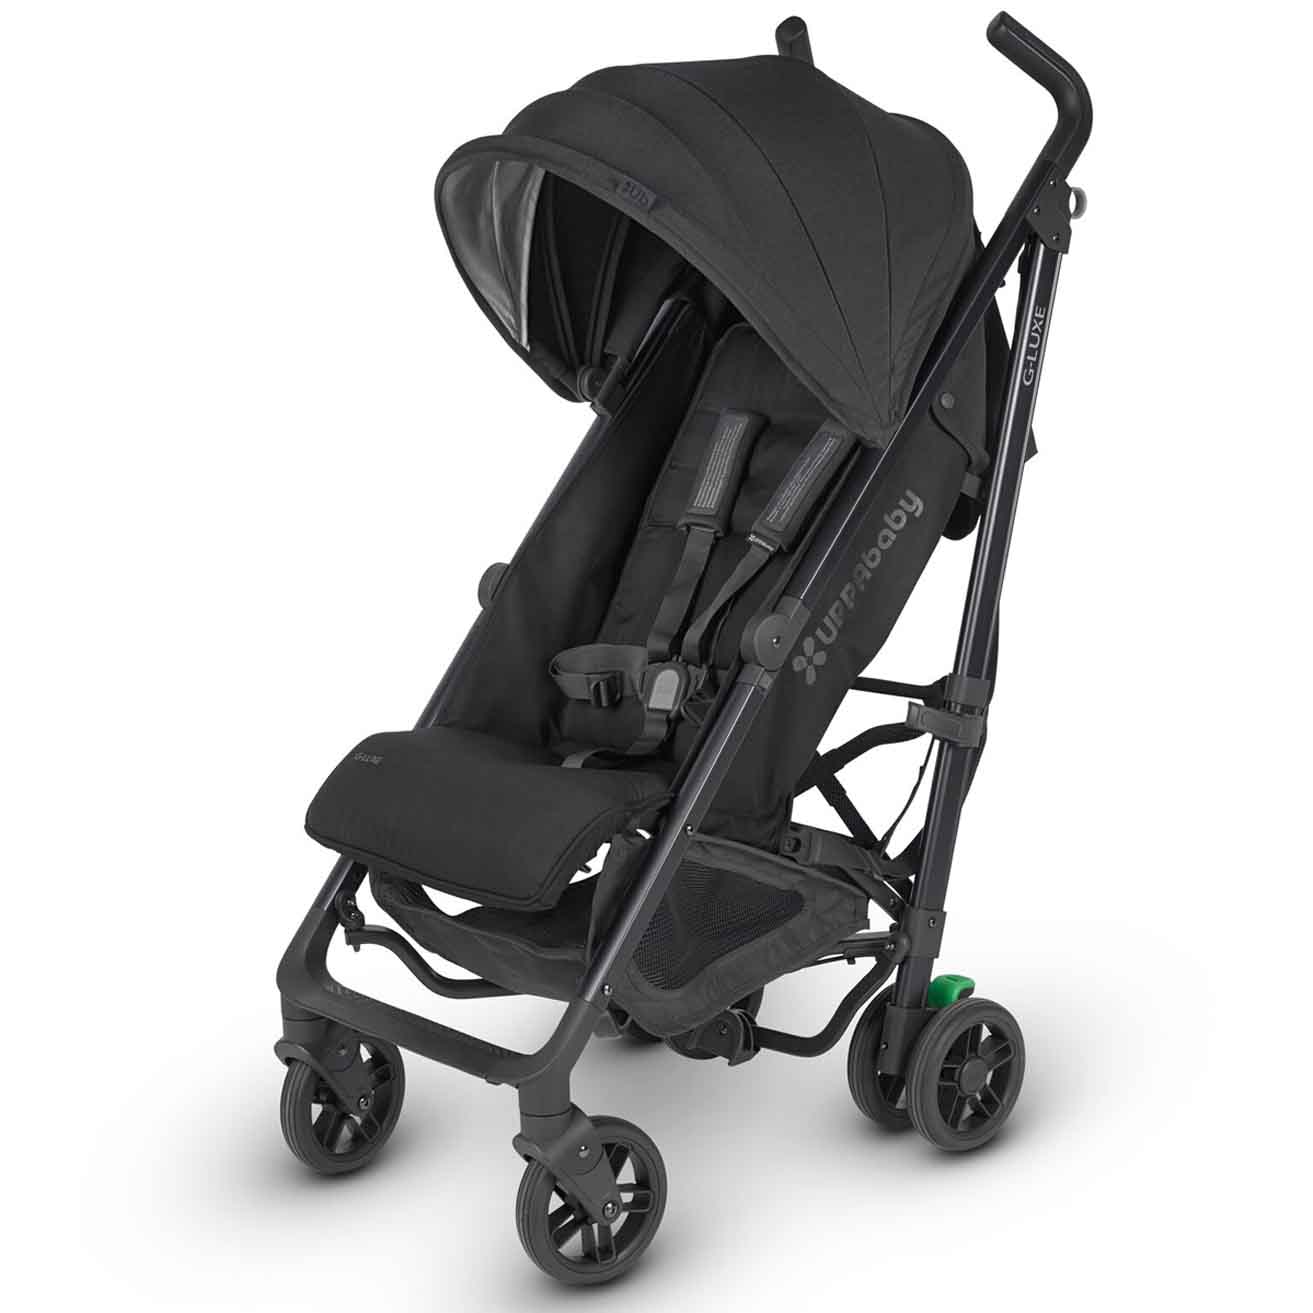 UPPAbaby G-Luxe Umbrella Stroller with cover in black 